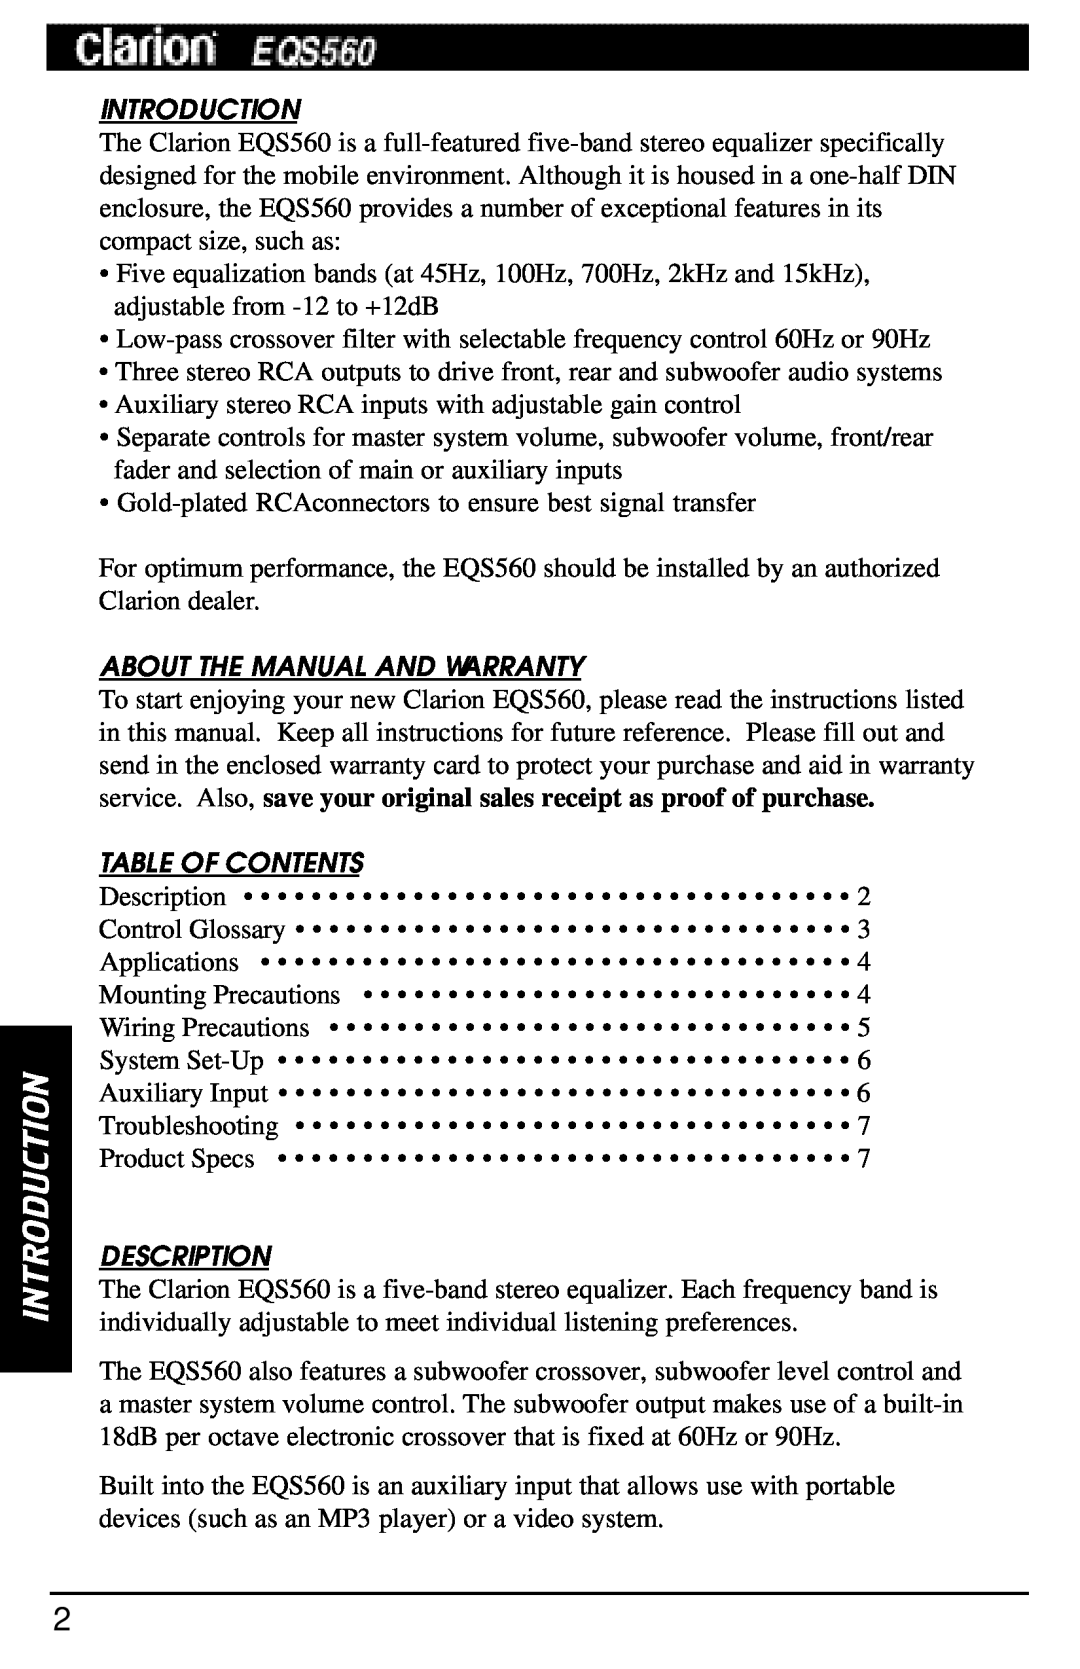 Clarion EQS560 manual Introduction, About The Manual And Warranty, Table Of Contents, Description 